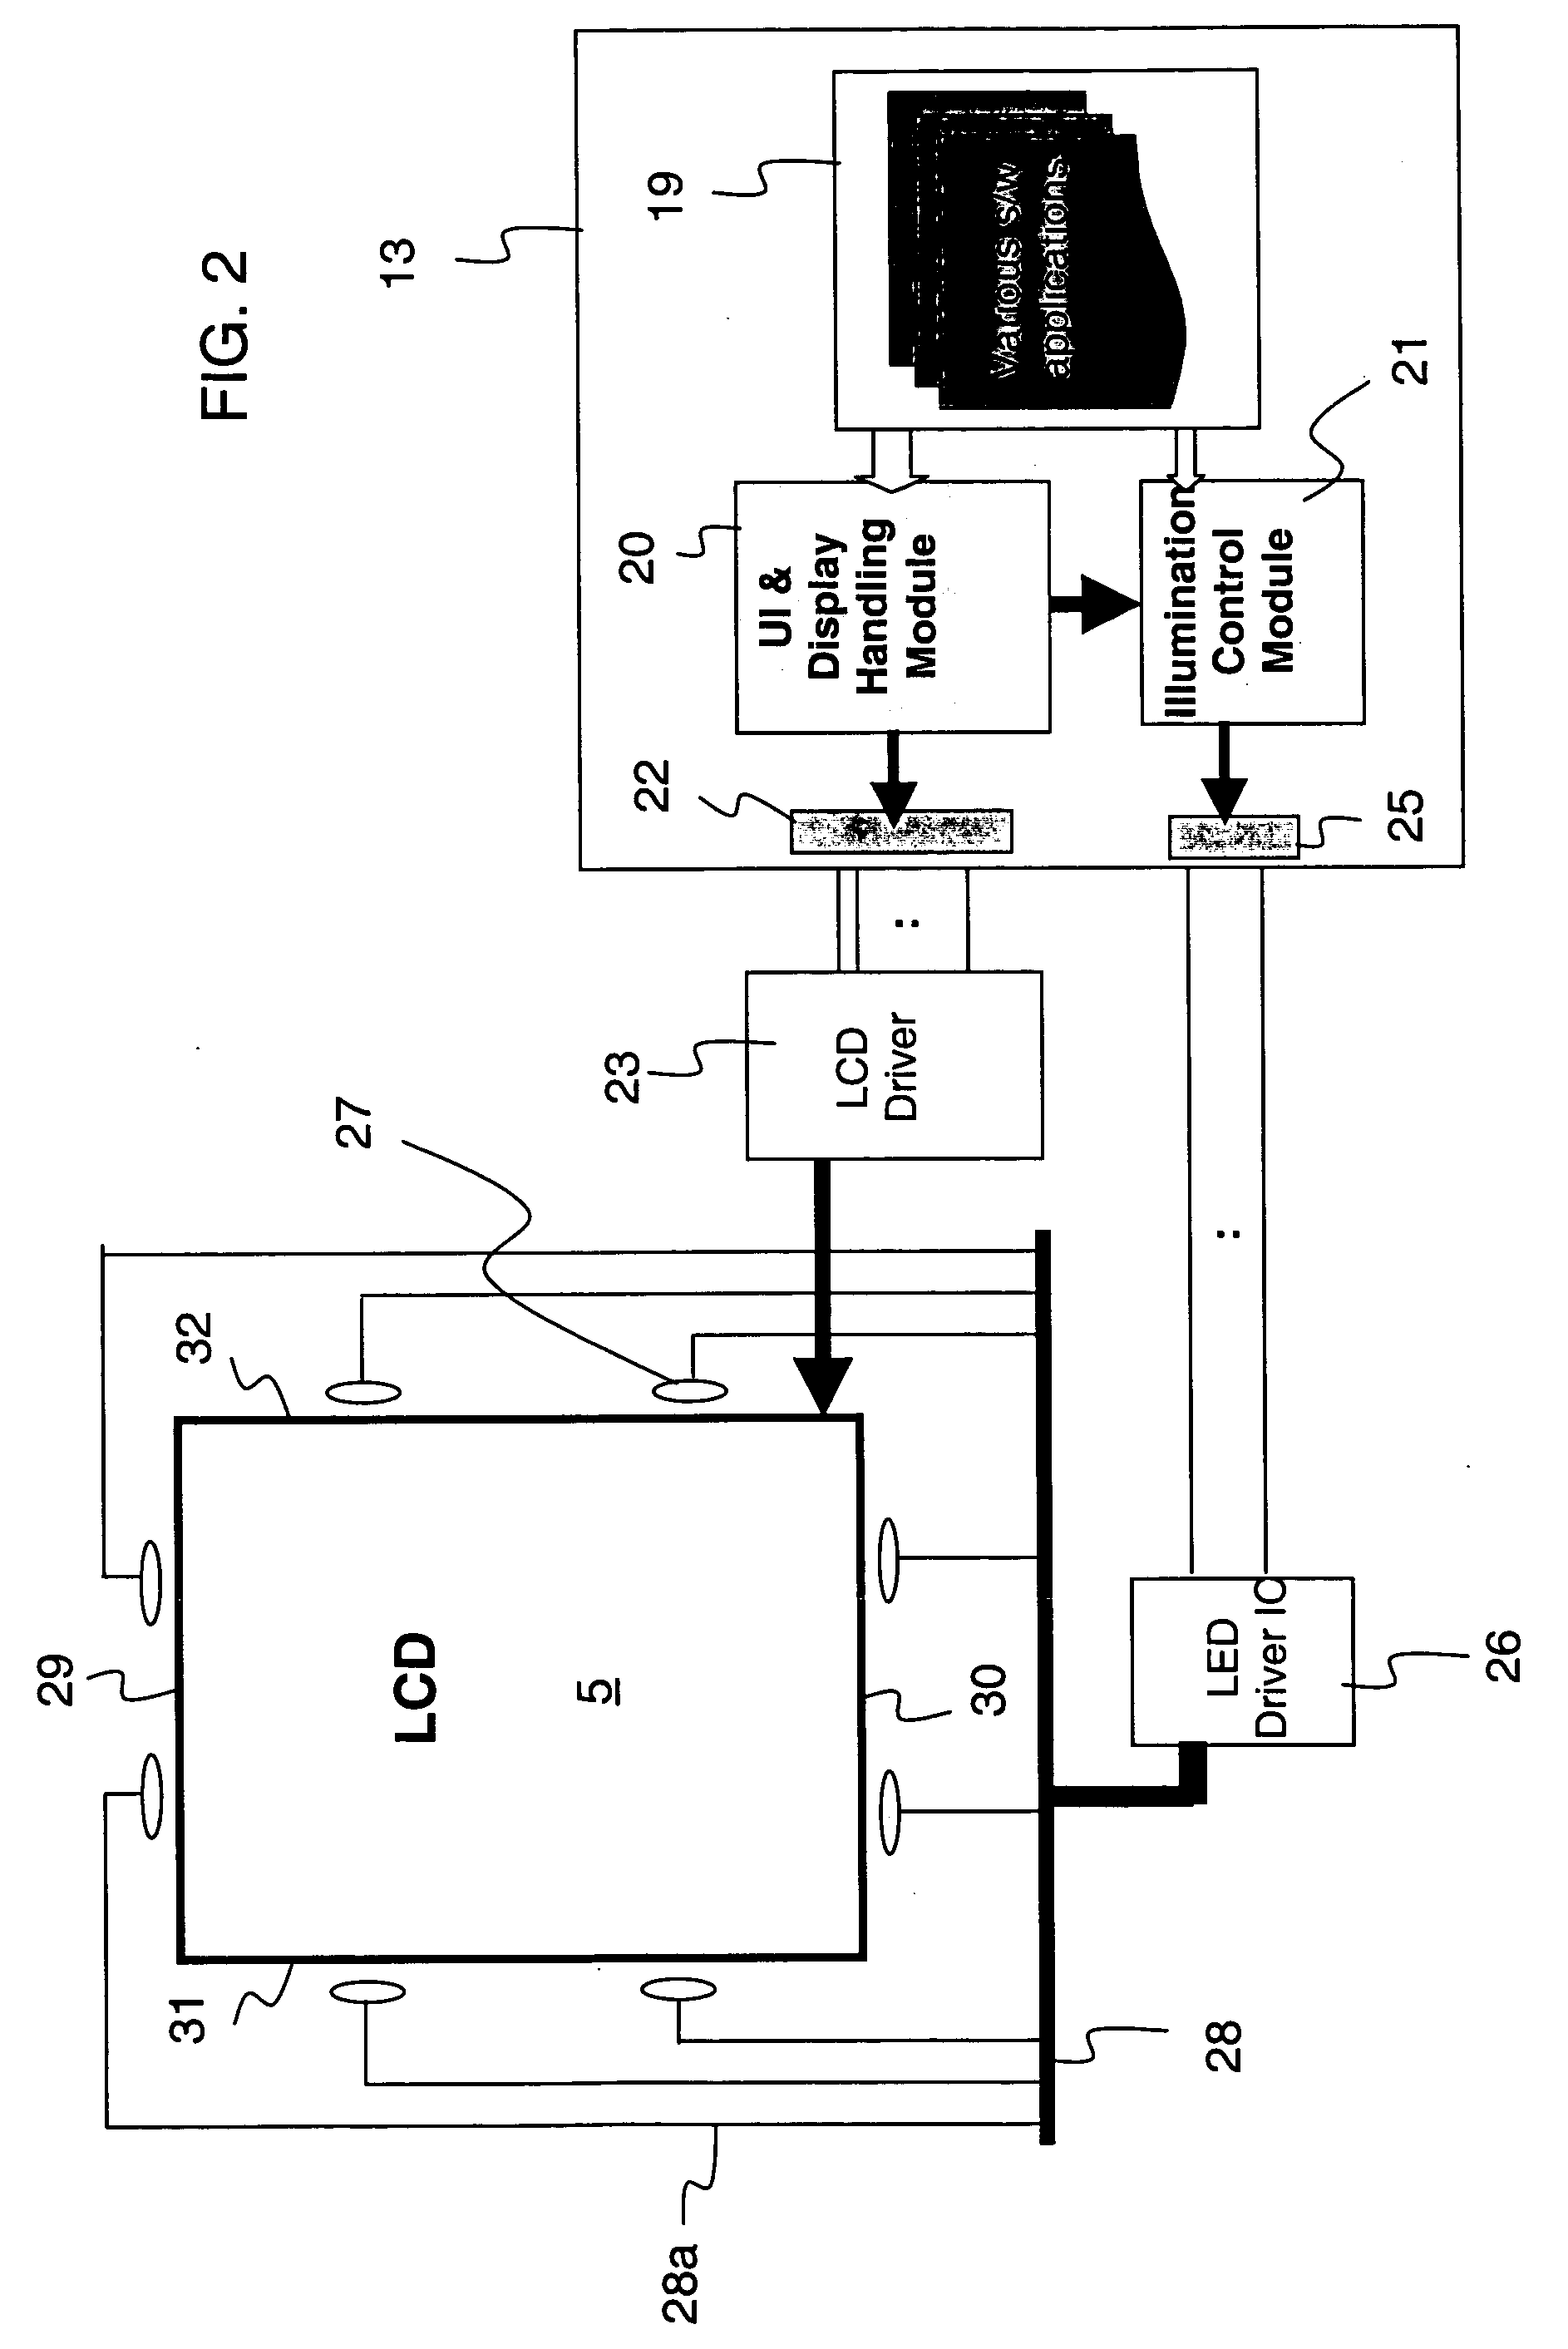 Selective illumination of regions of an electronic display